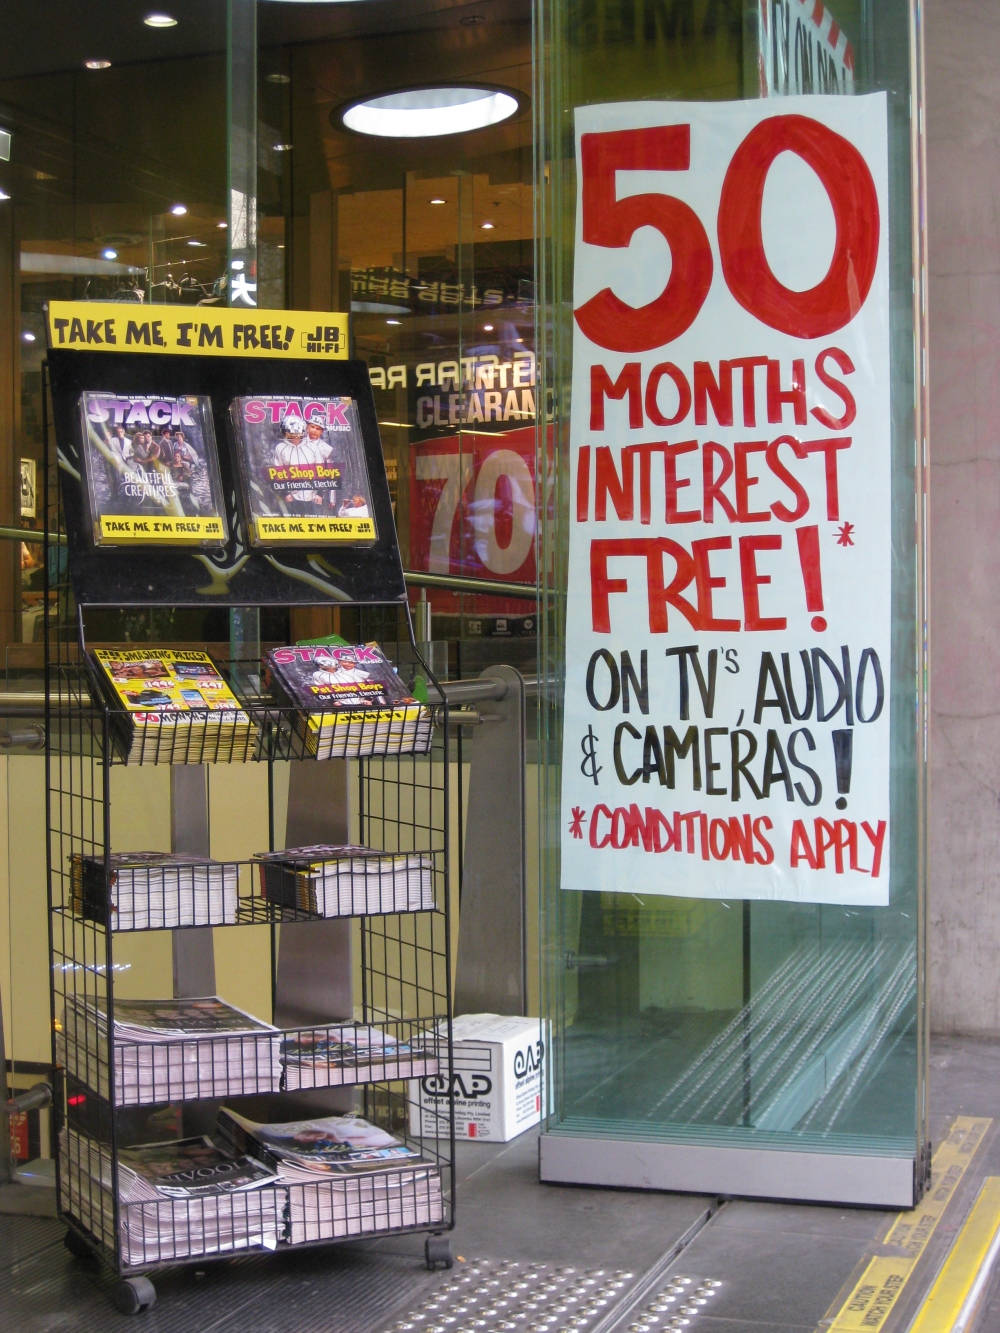 Electronics store in Melbourne's city offers generous installment agreement payment plans. Photo: Mabel Kwong